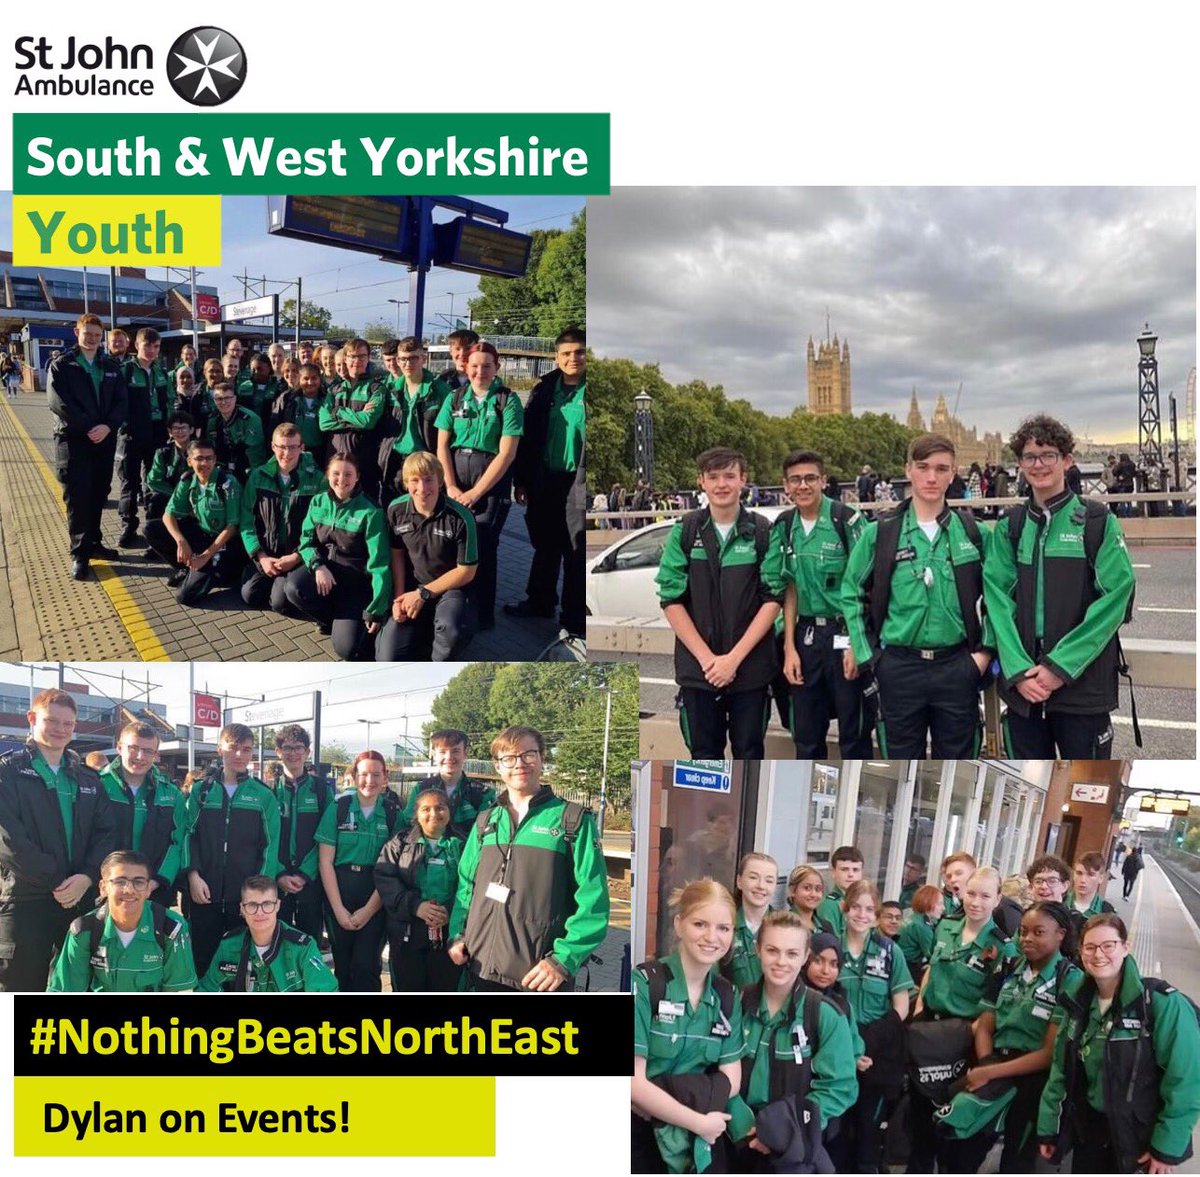 Happy #NationalVolunteersWeek!!

To kick the week off, check out my post (@ dcoty_s.w.yorks)!

Ask Dylan from South and West Yorkshire about #volunteering 🤩🤩🤩
Our cadets really are the most passionate volunteers 💚

@stjohnambulance @SJAYouthEng #StJohnPeople #YoungPeople